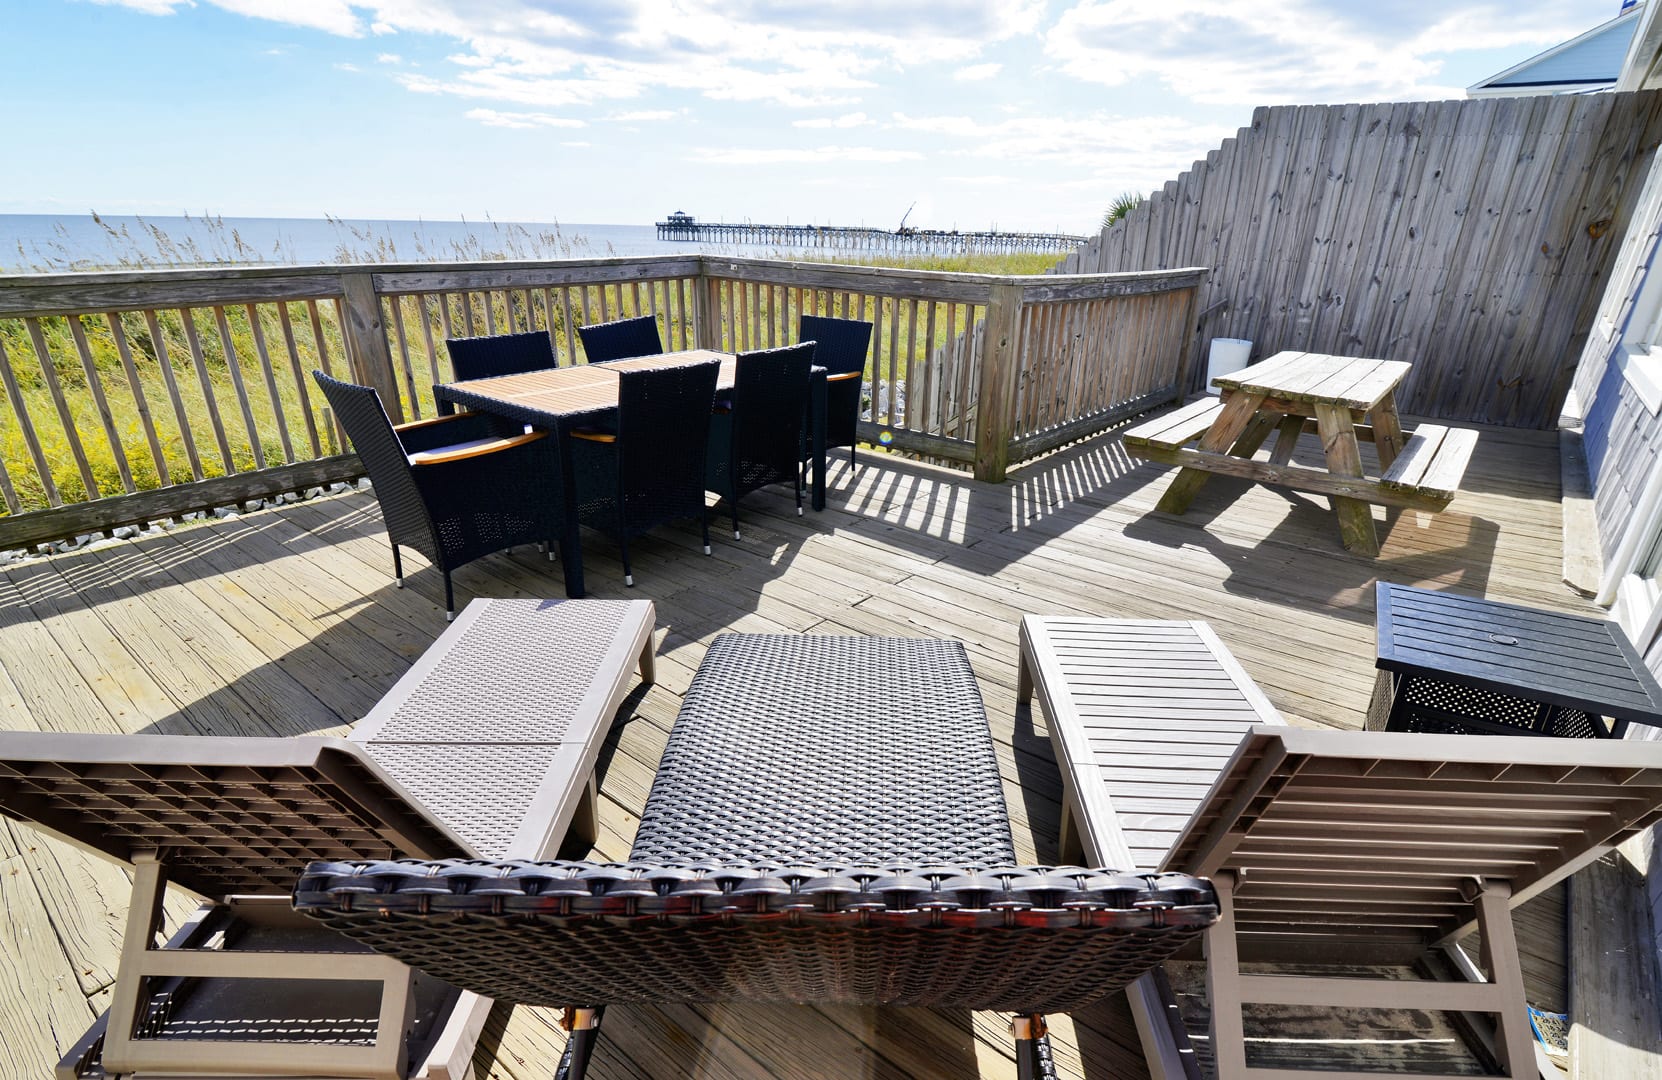 2 Decks 2 Patios 2 Dining Tables 4 Sun Loungers & More